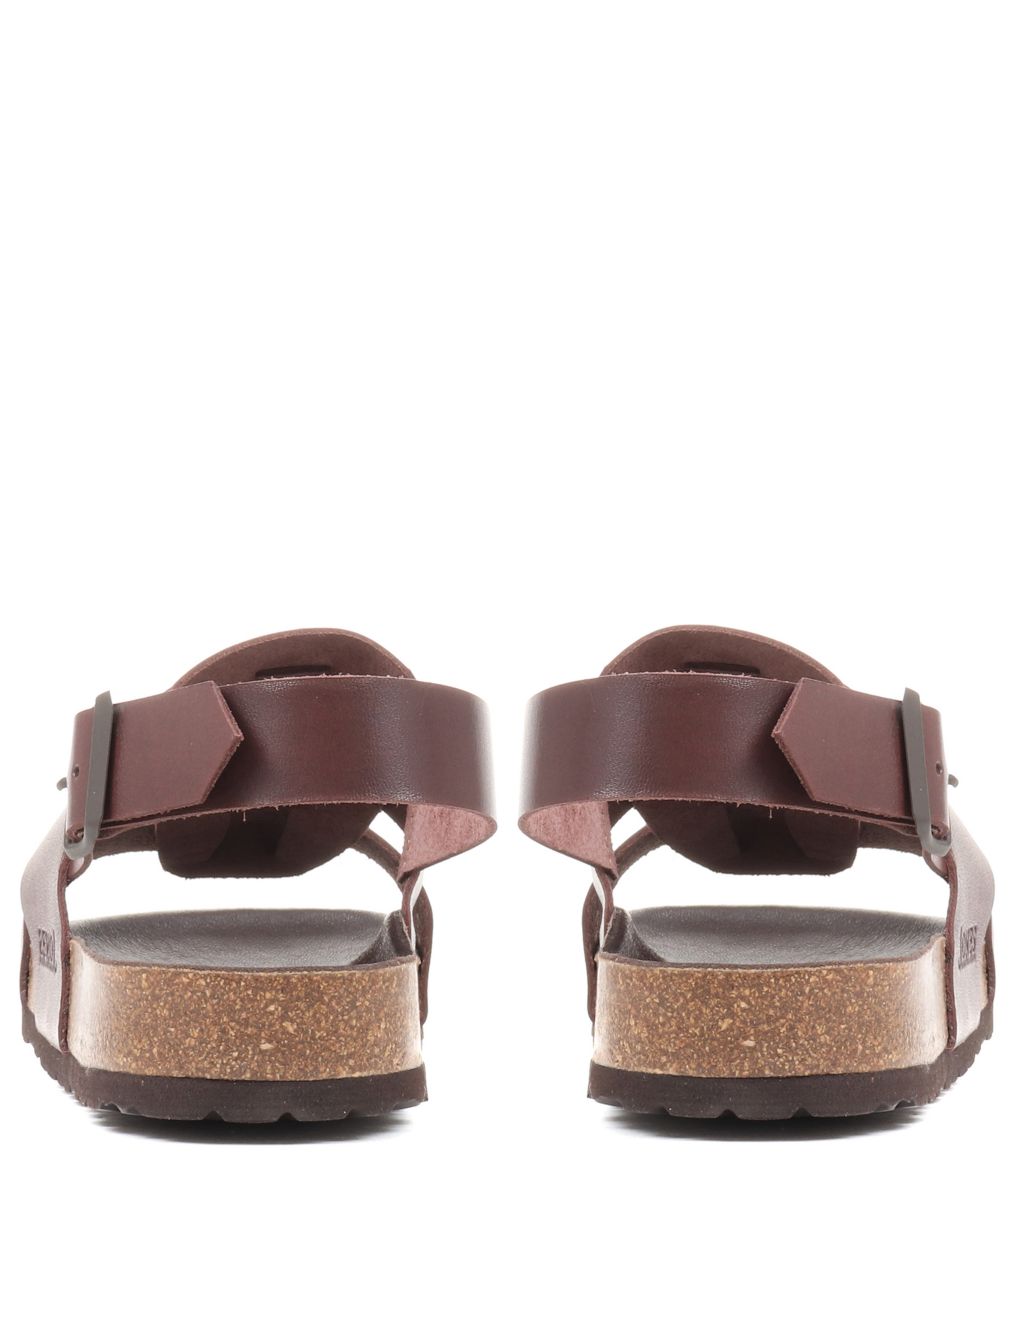 Leather Sandals image 3